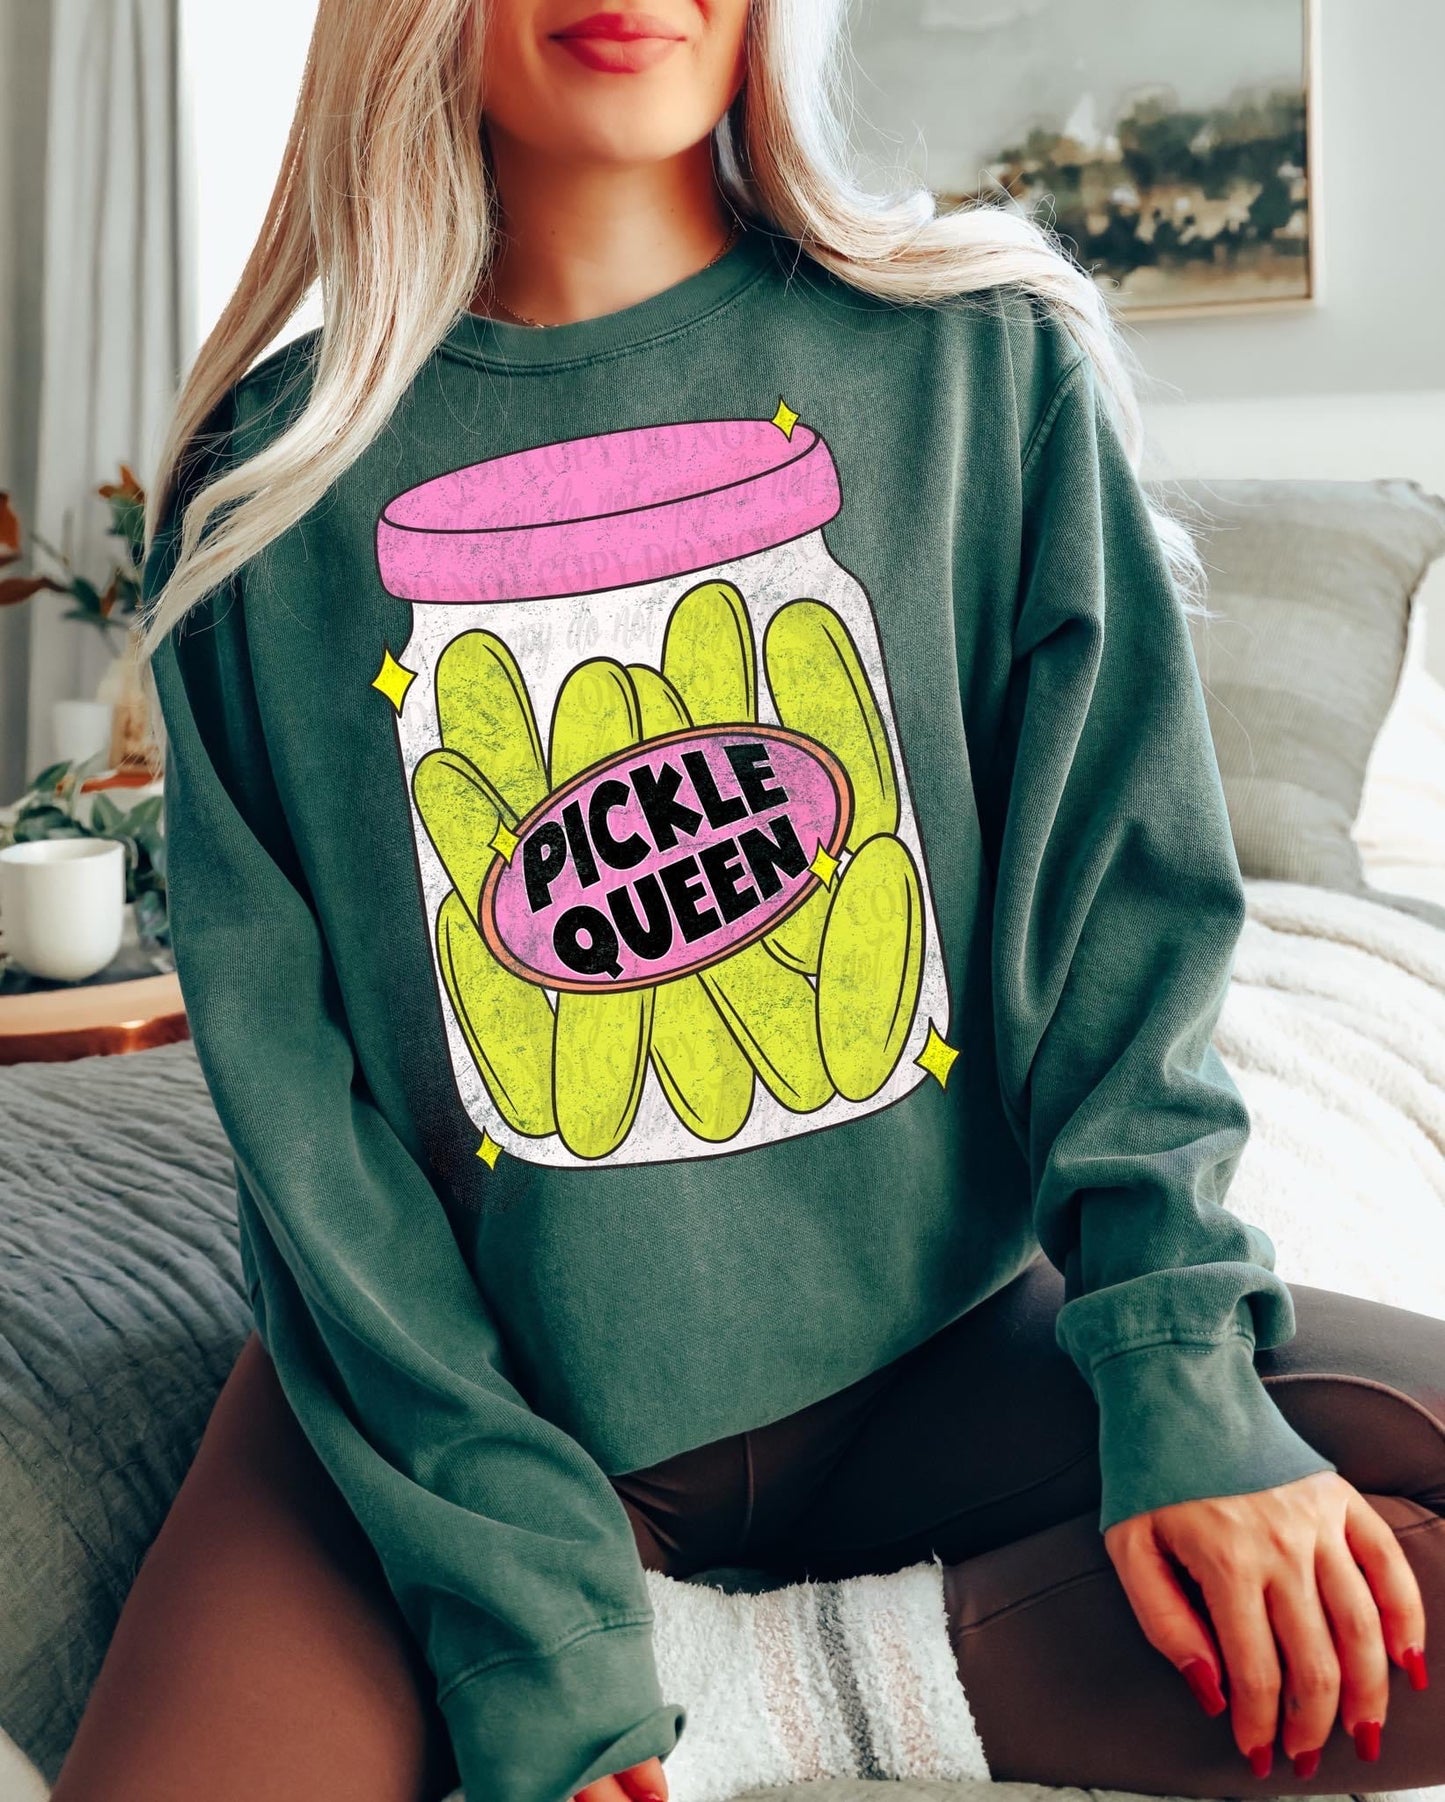 Pickle Queen - Tee also available